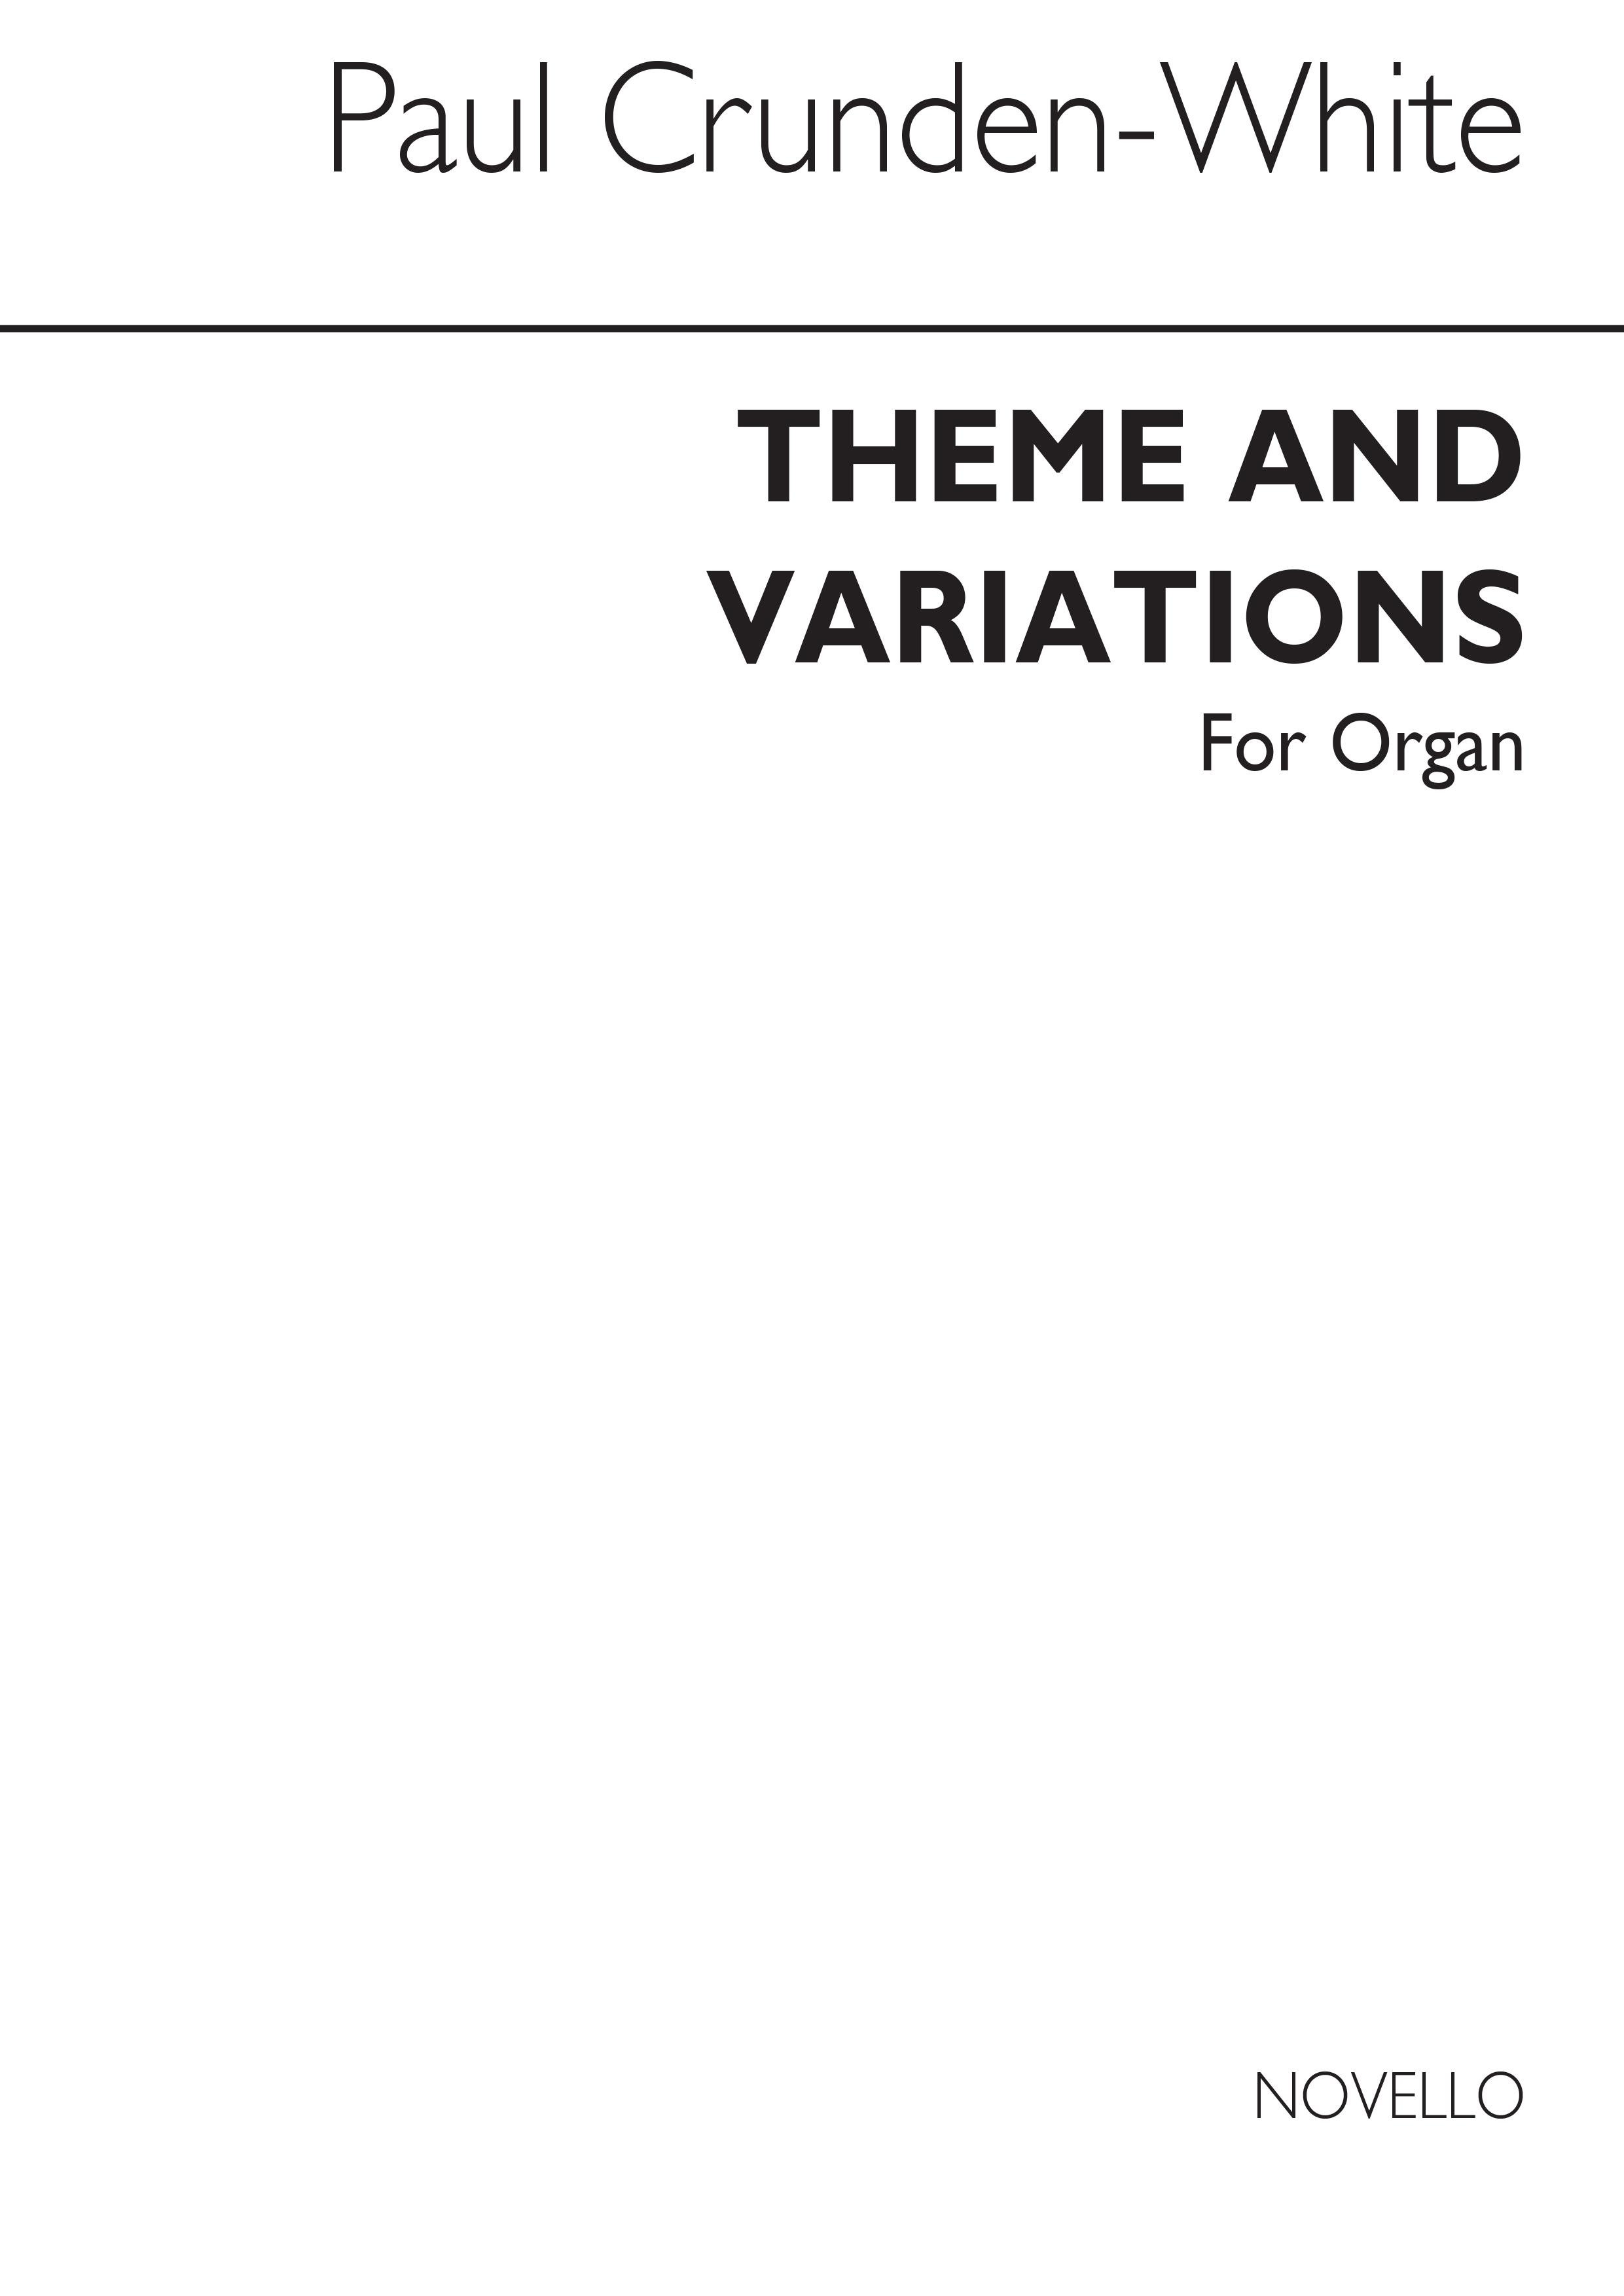 Paul Crunden-White: Theme And Variations - Organ